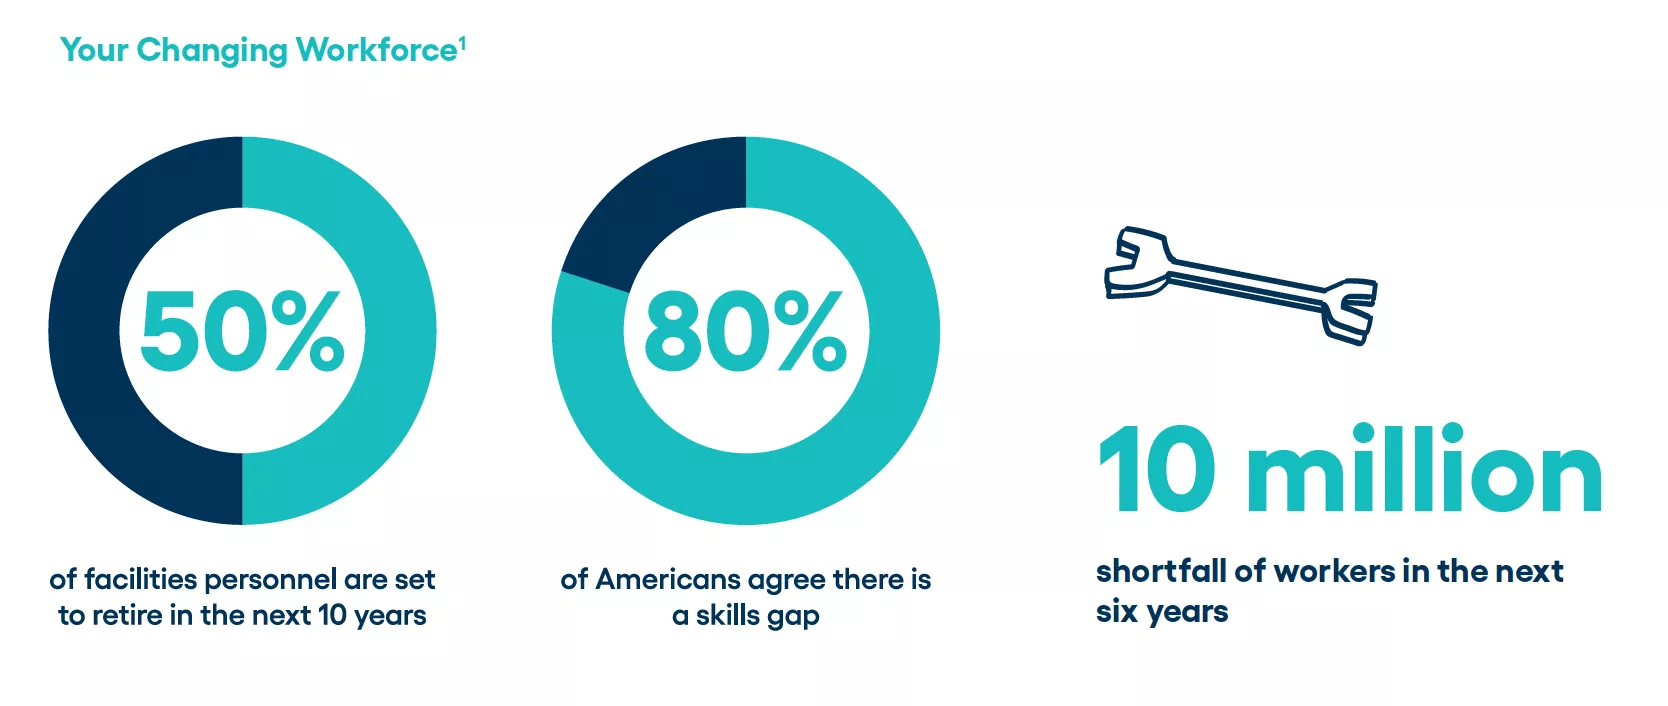 Your Changing Workforce: 50% of facilities are set to retire in the next 10 years. 80% of Americans agree there is a skills gap. 10 million shortfall of workers in the next 6 years.